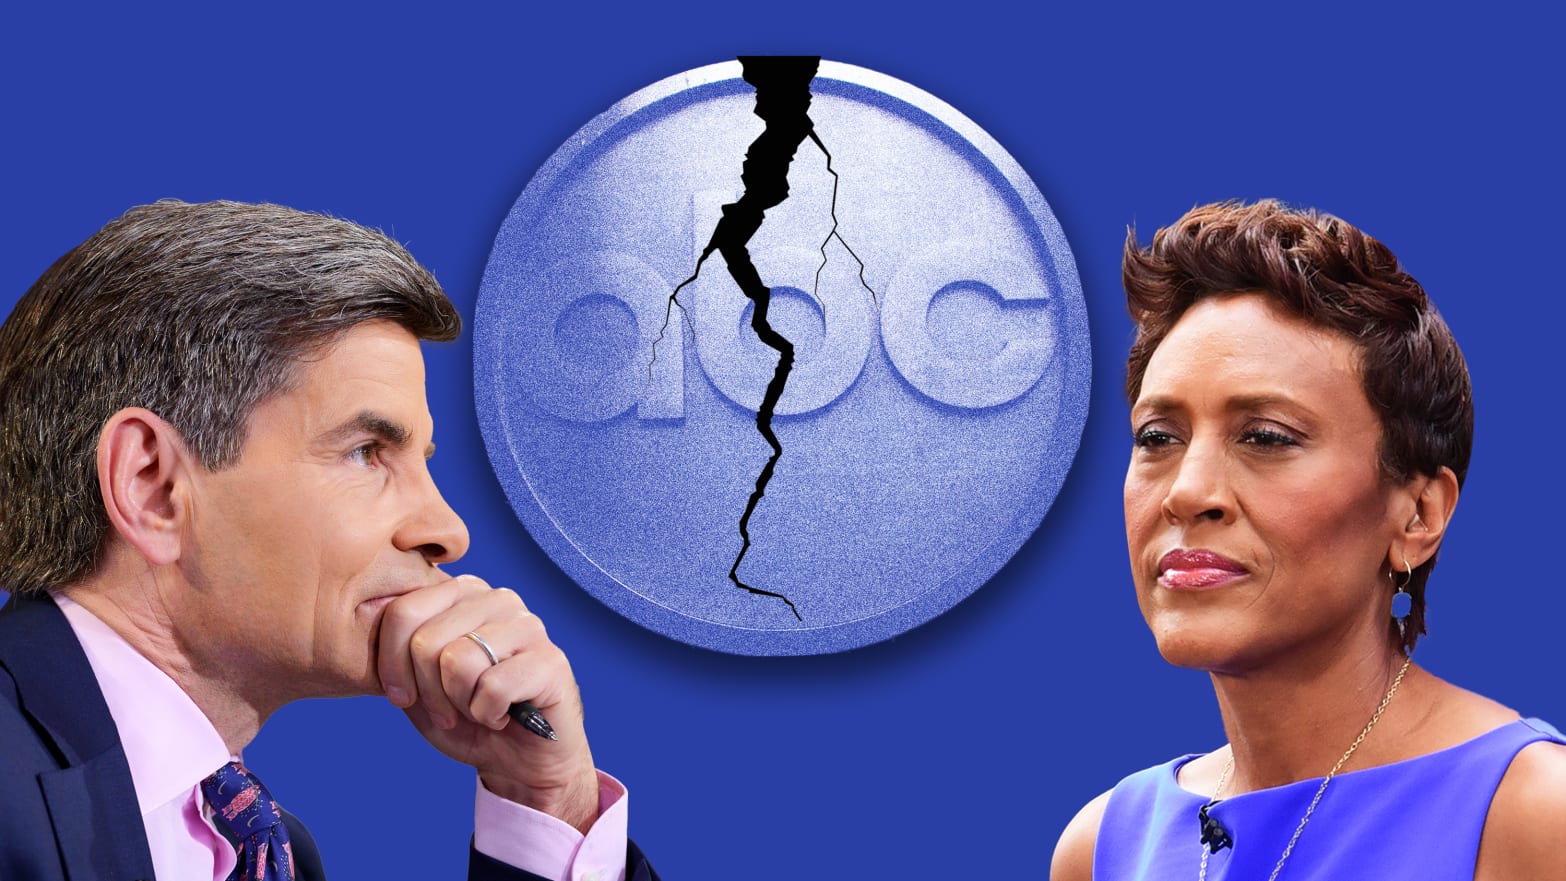 Bombshell Lawsuit Has GMA Co-Hosts George Stephanopoulos and Robin Roberts at Each Others Throats